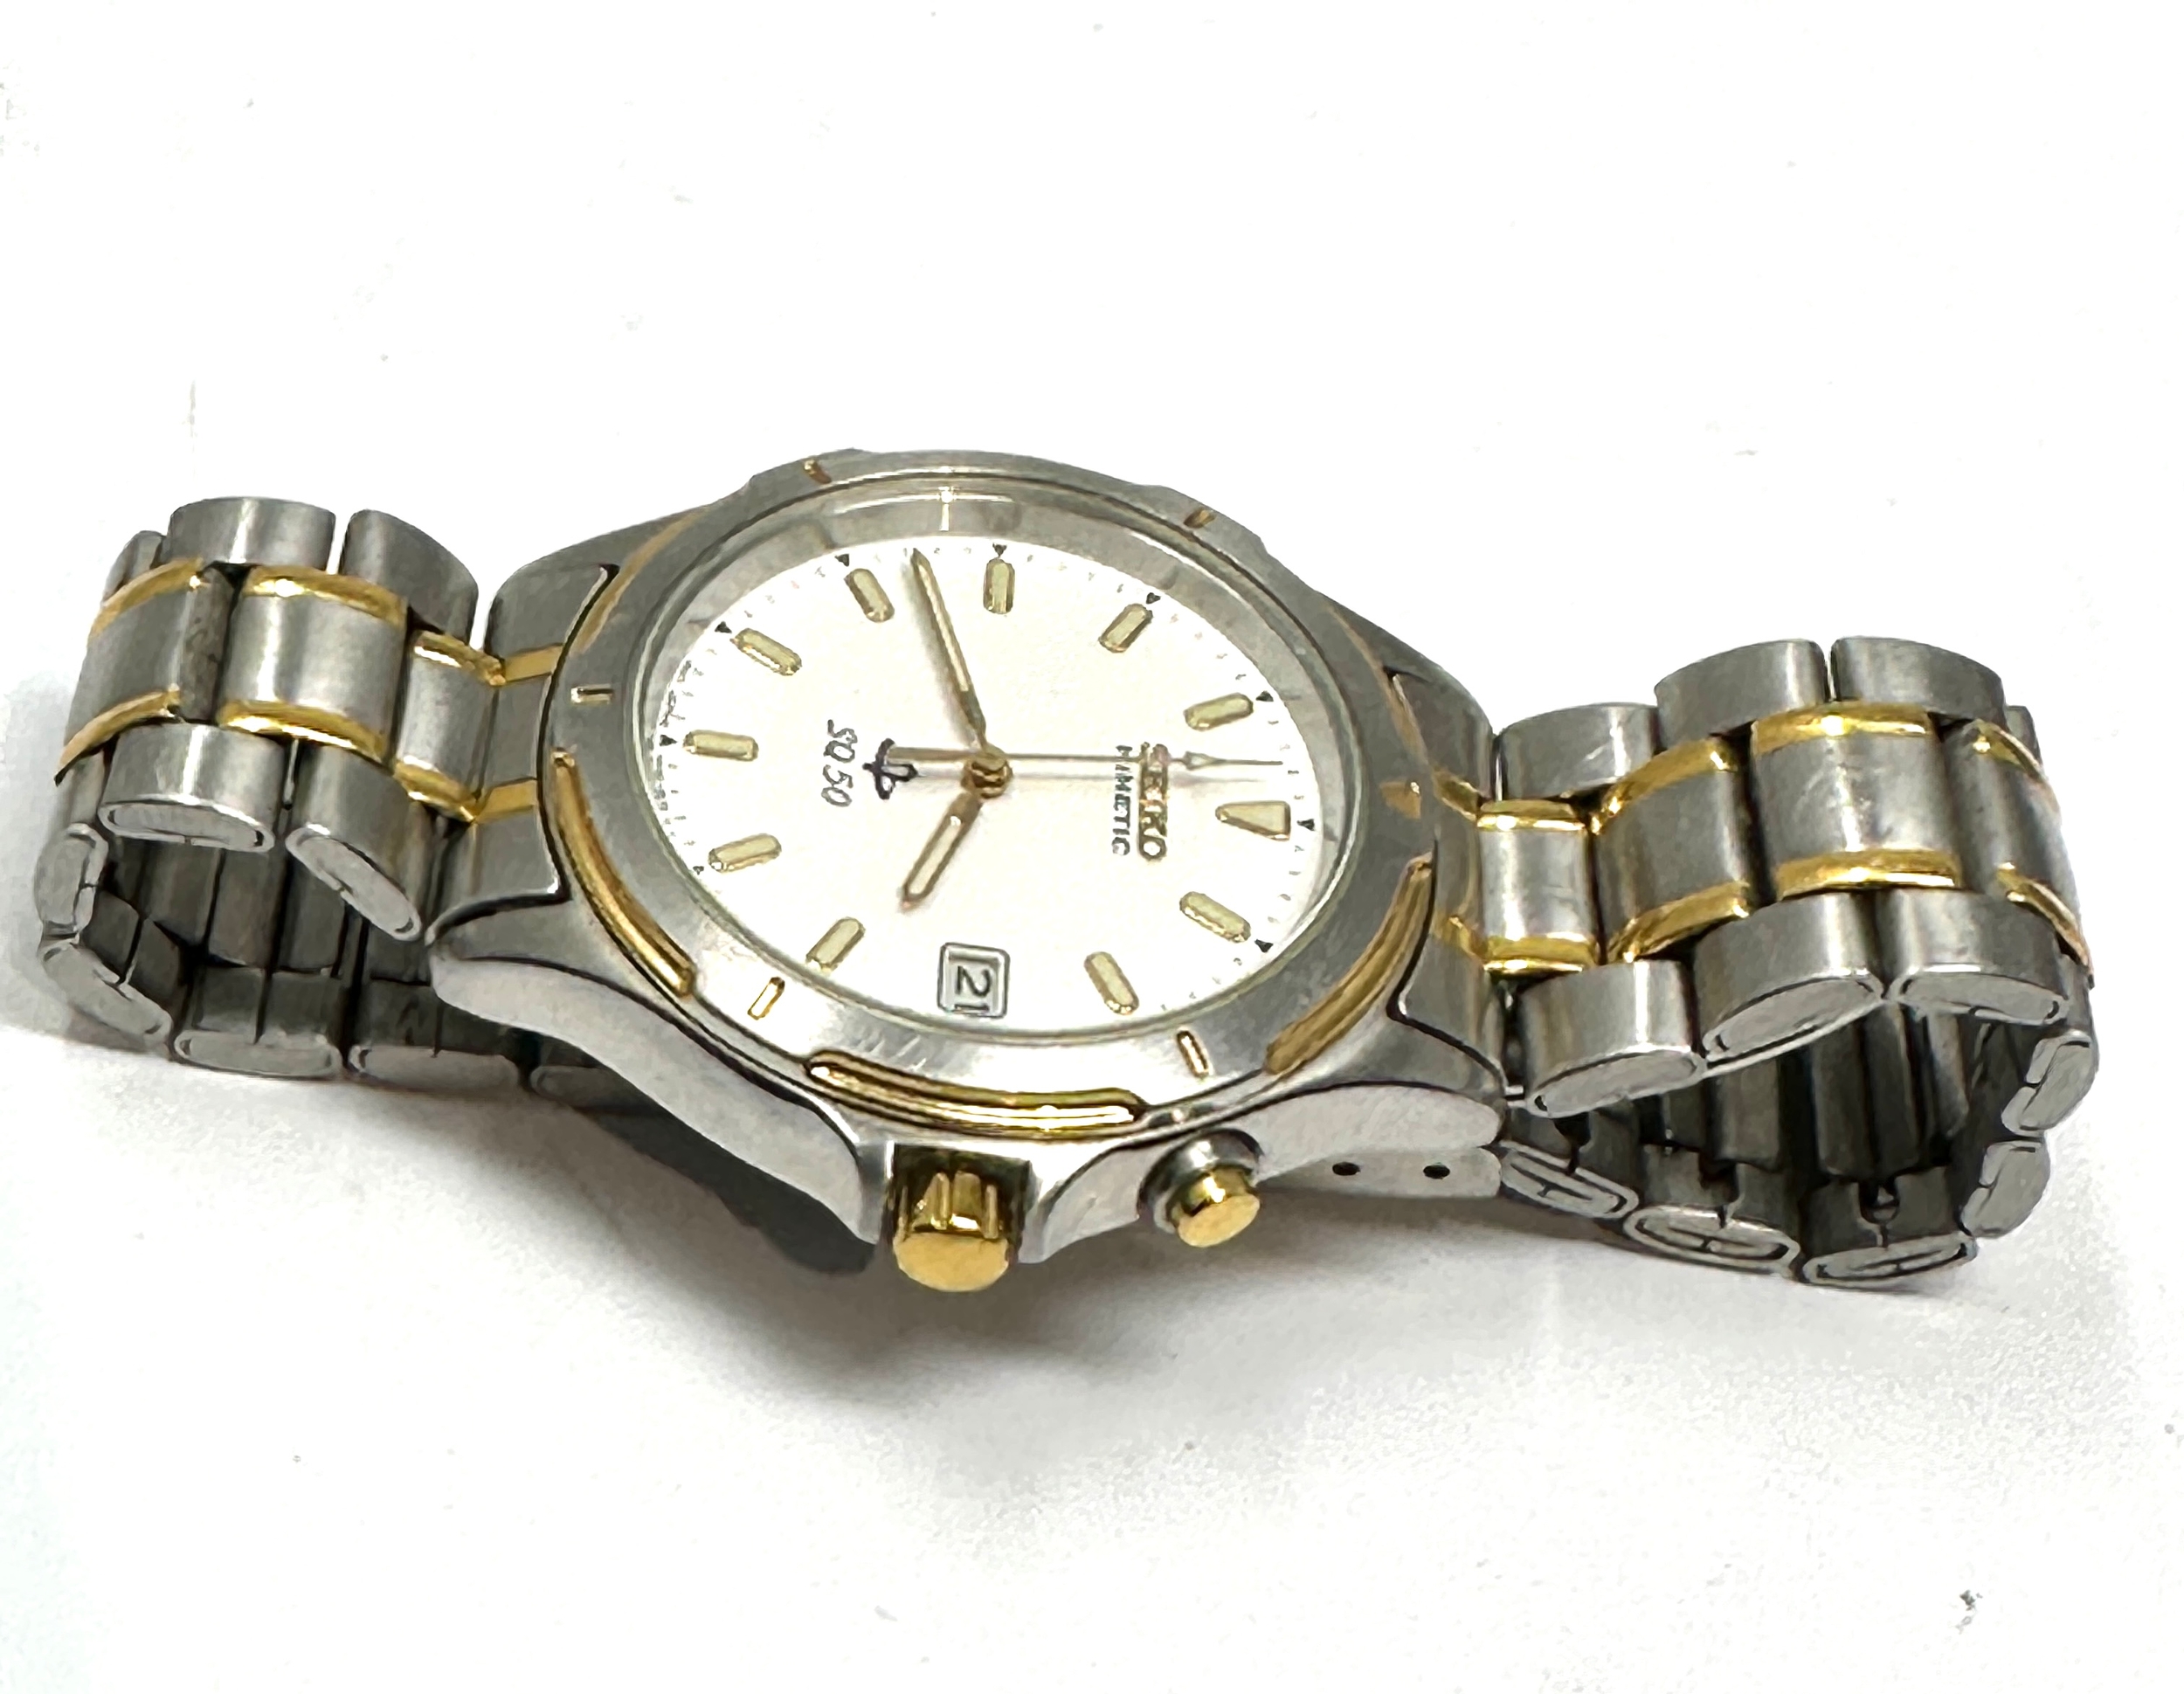 Gents Seiko kinetic sq 50 the watch does tick - Image 2 of 3